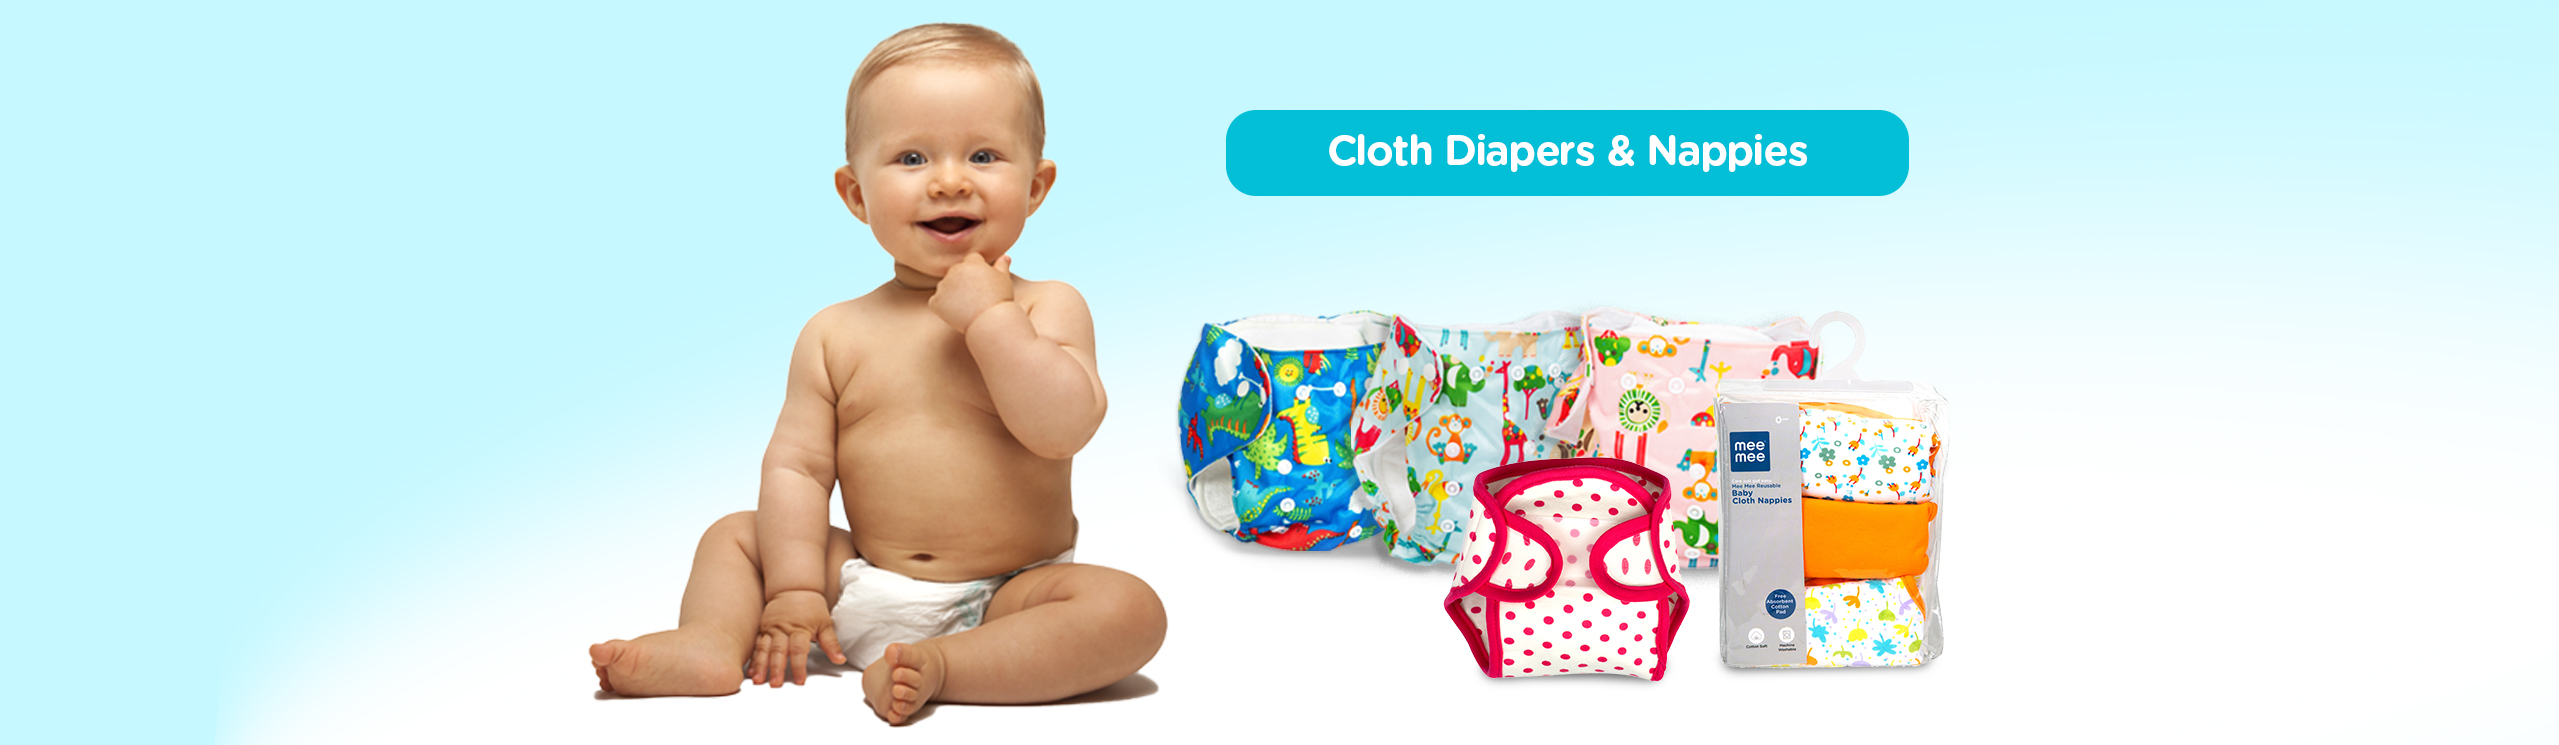 me n moms CLOTH DIAPERS & NAPPIES